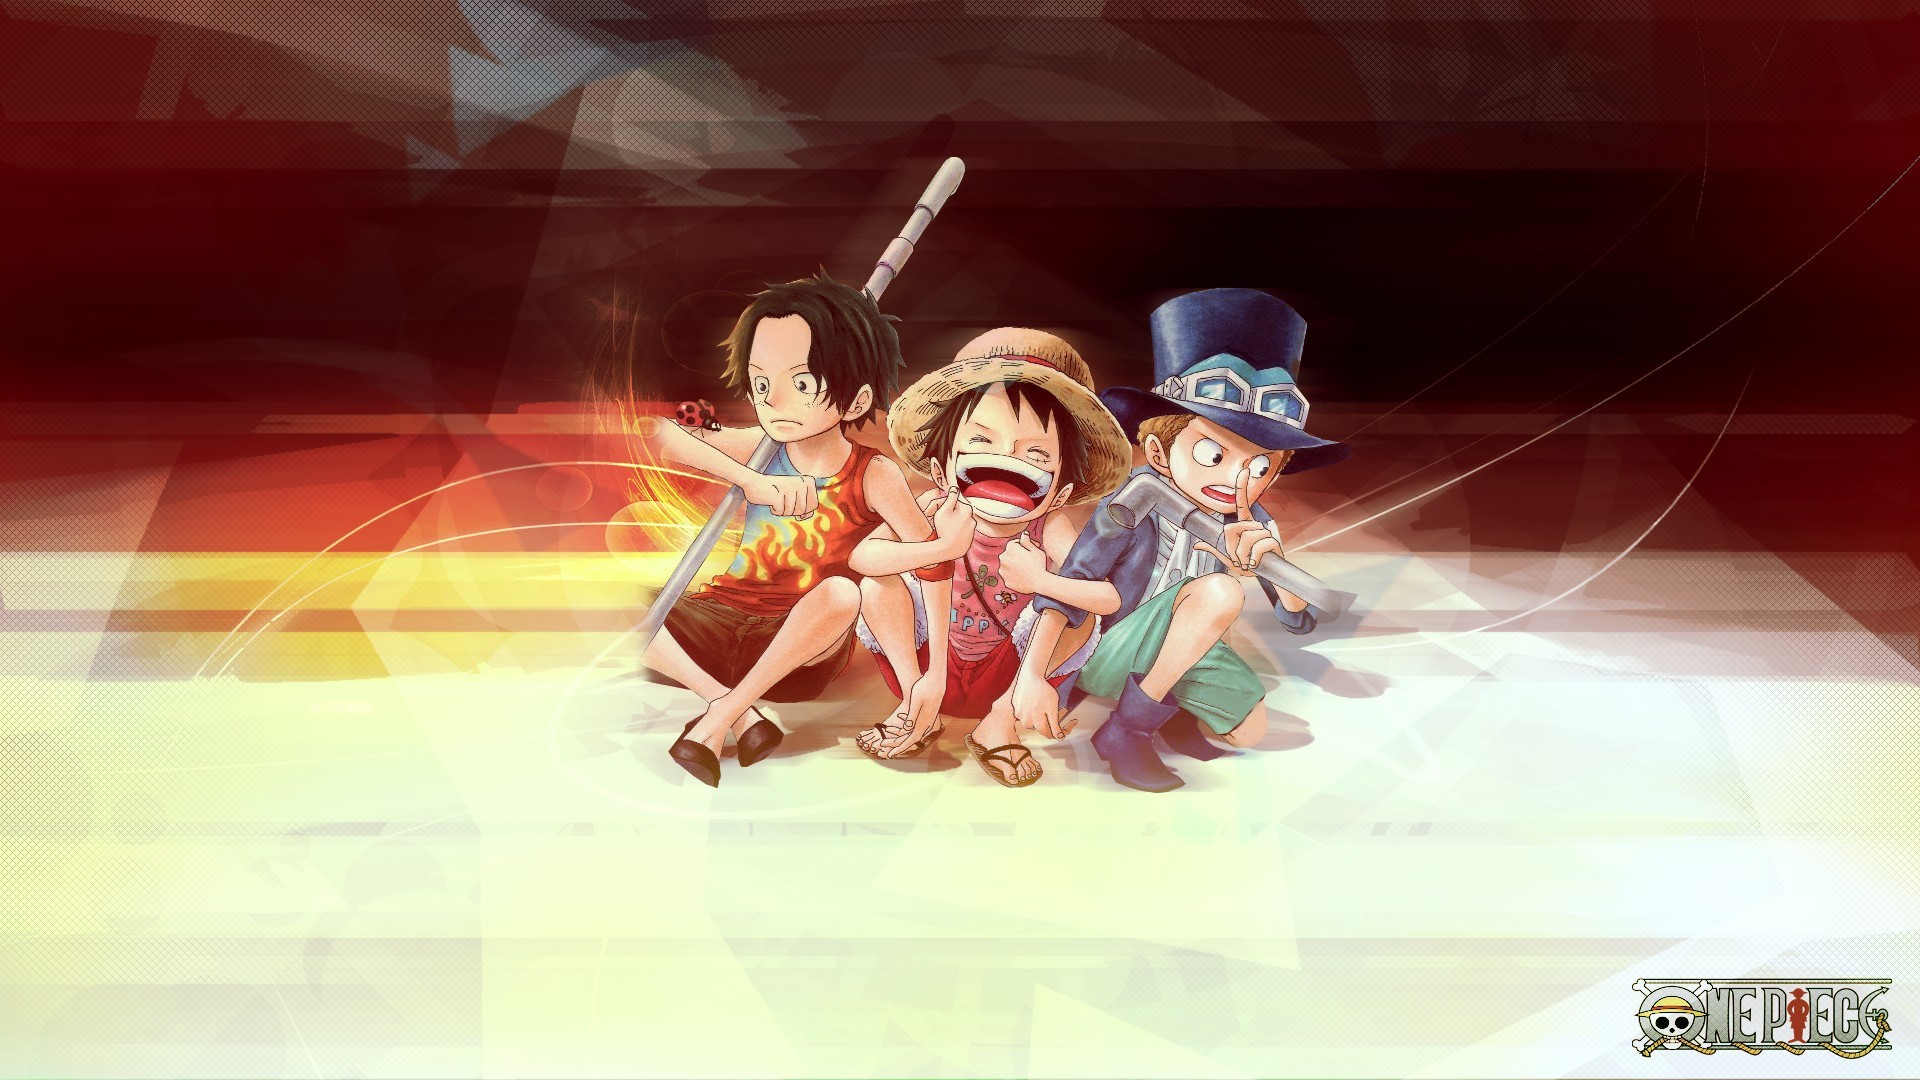 1920x1080 Ace, Sabo and Luffy on One Piece Anime Wallpaper